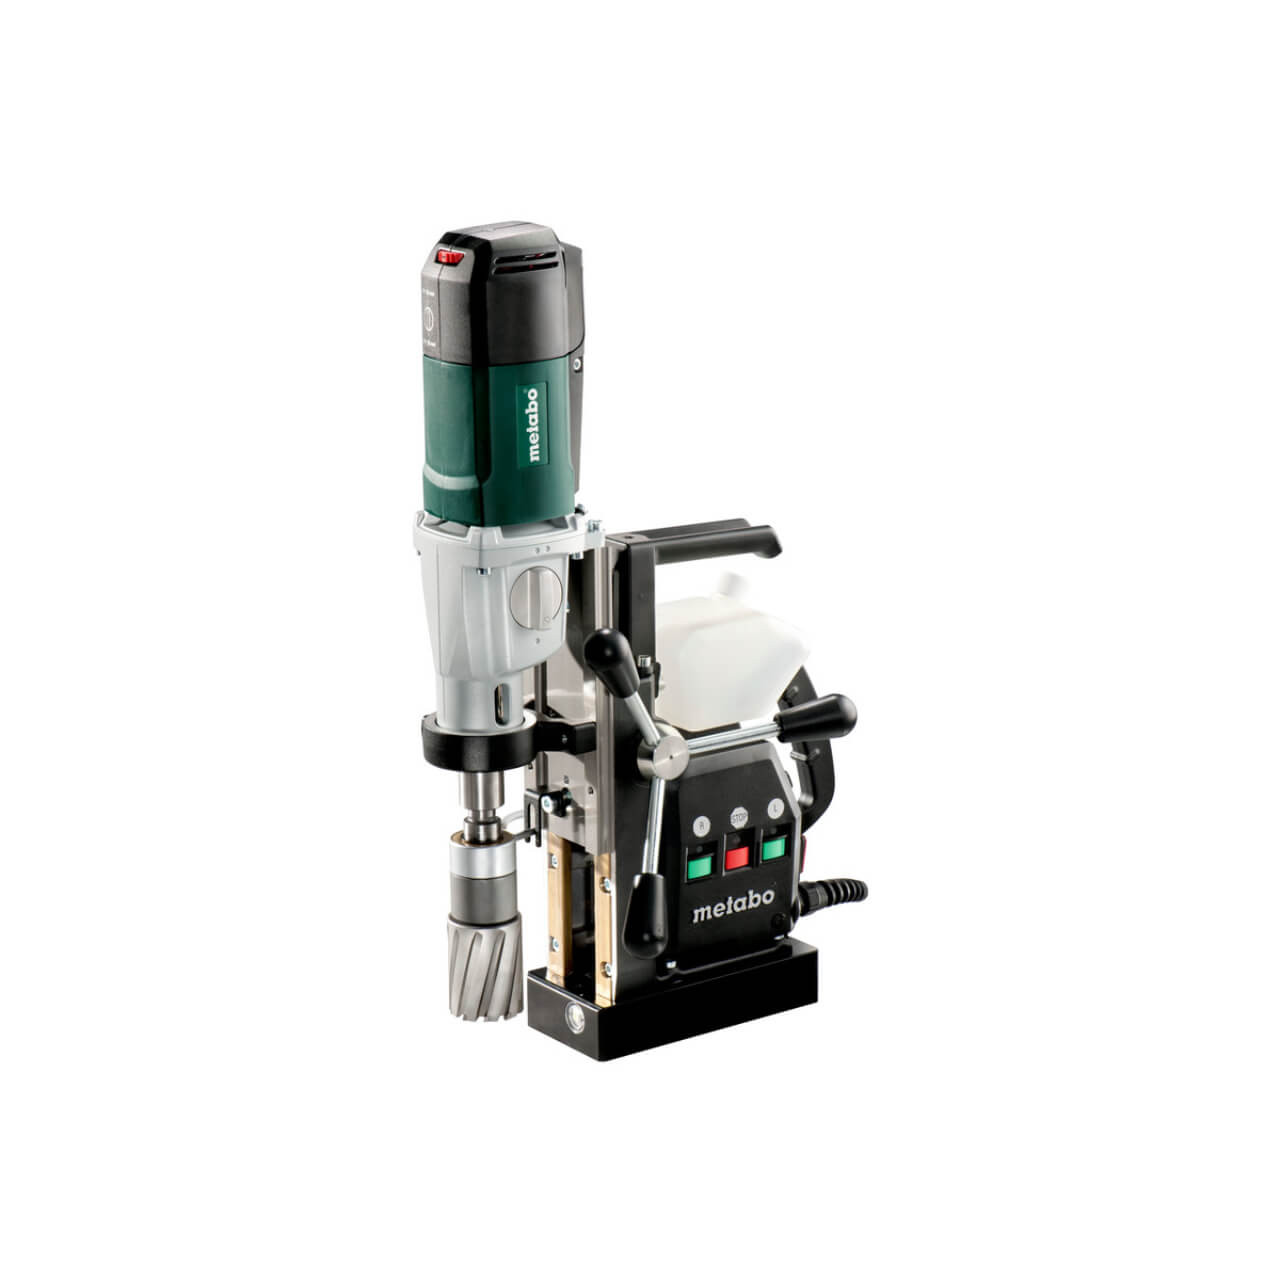 Metabo MAG 50 Magnetic Core Drill 1200W